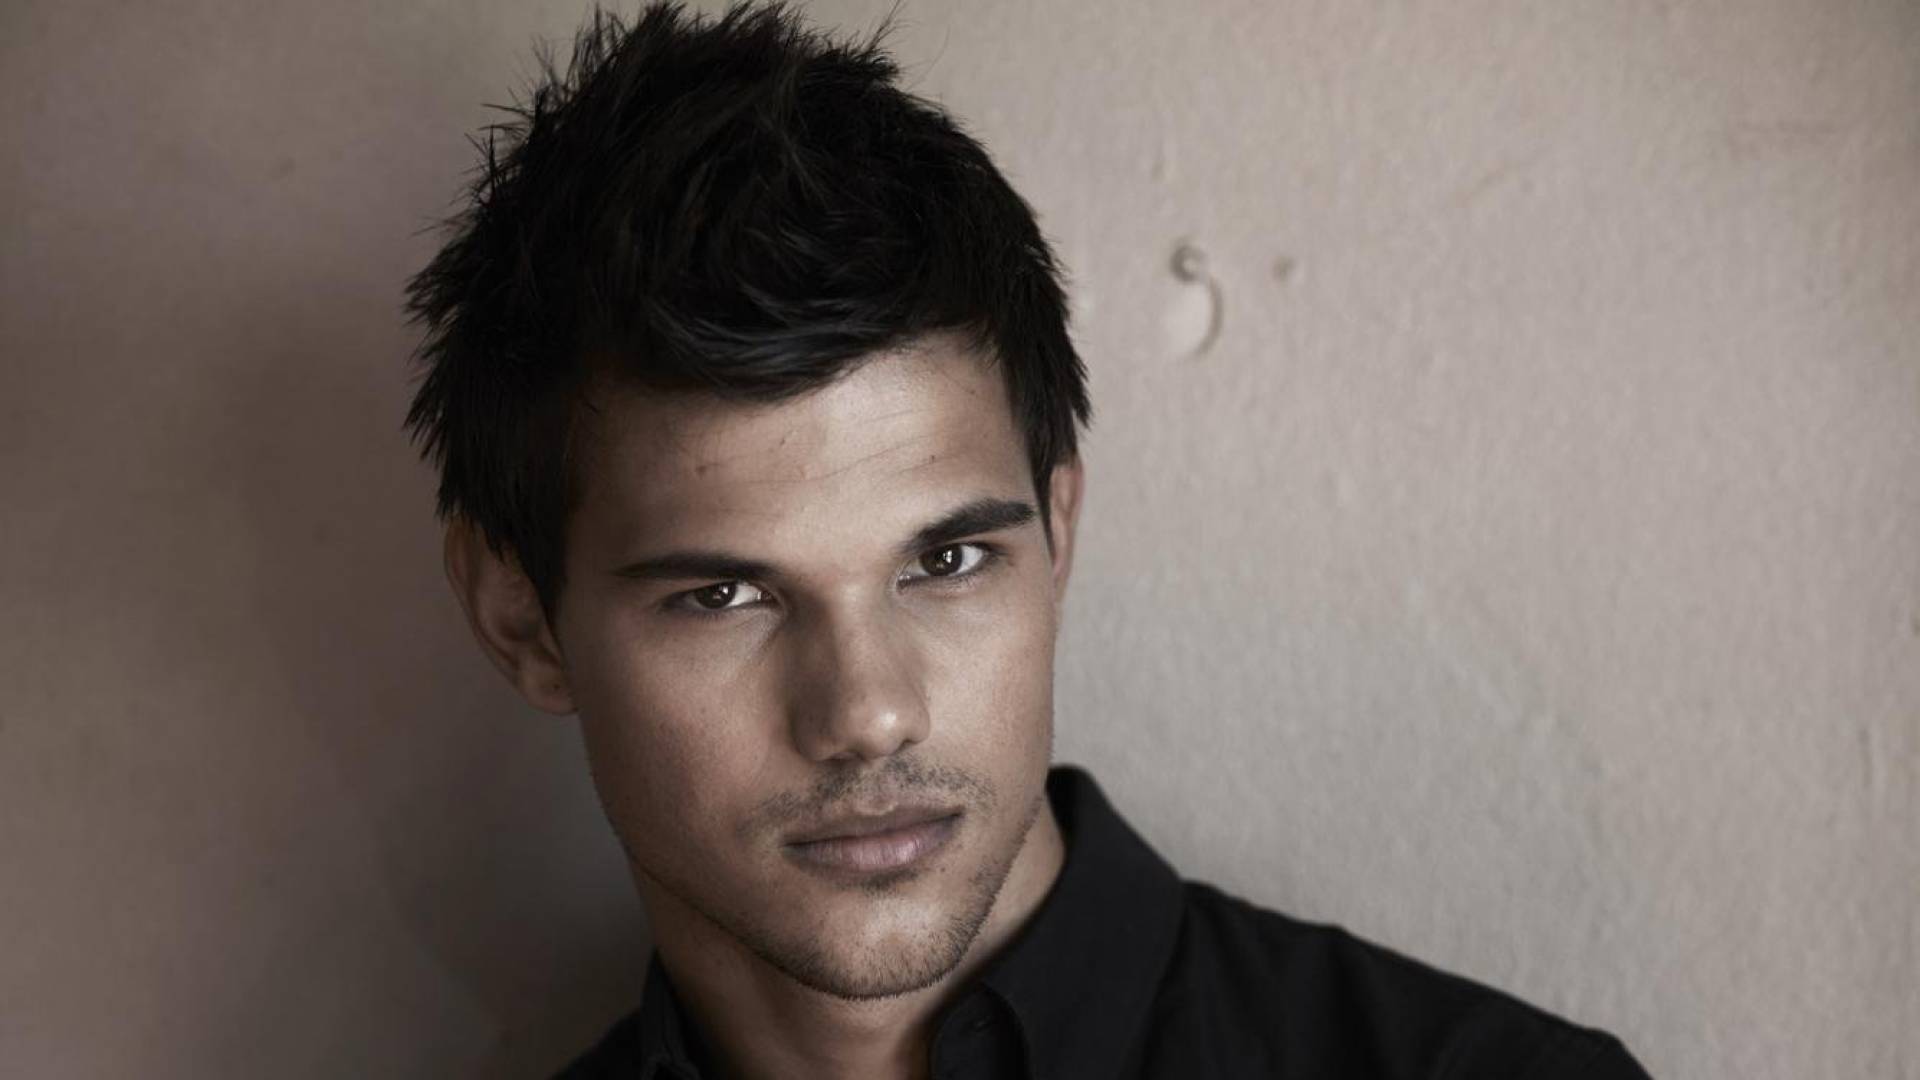 Taylor Lautner Background Wallpaper High Definition Quality